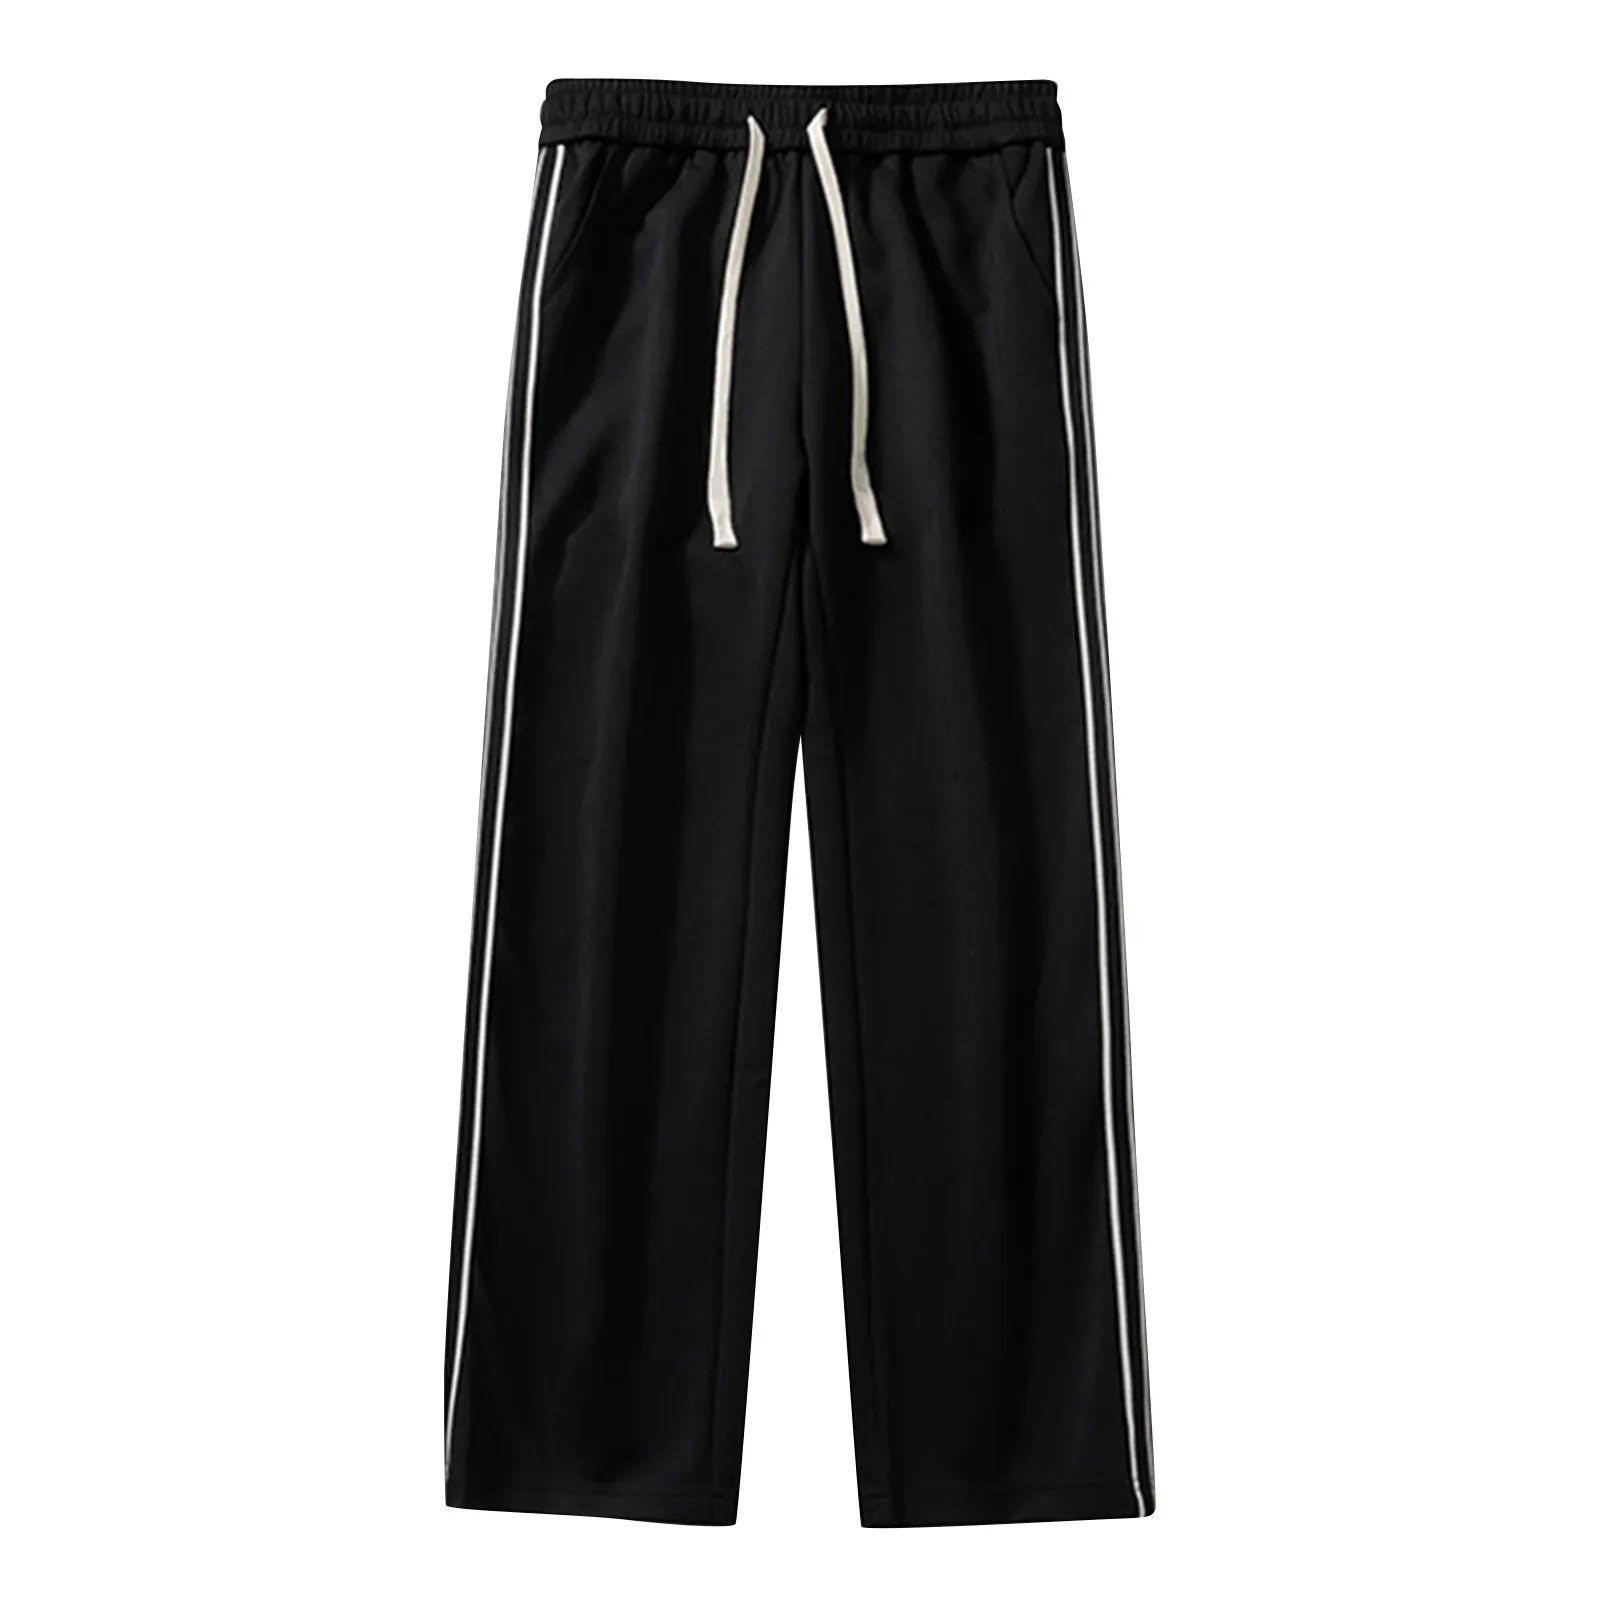 

Men'S Striped Sweatpants Spring And Fall Casual Loose Straight Pants Casual Wide-Legged Sweatpants Pocket Korean Style Trousers